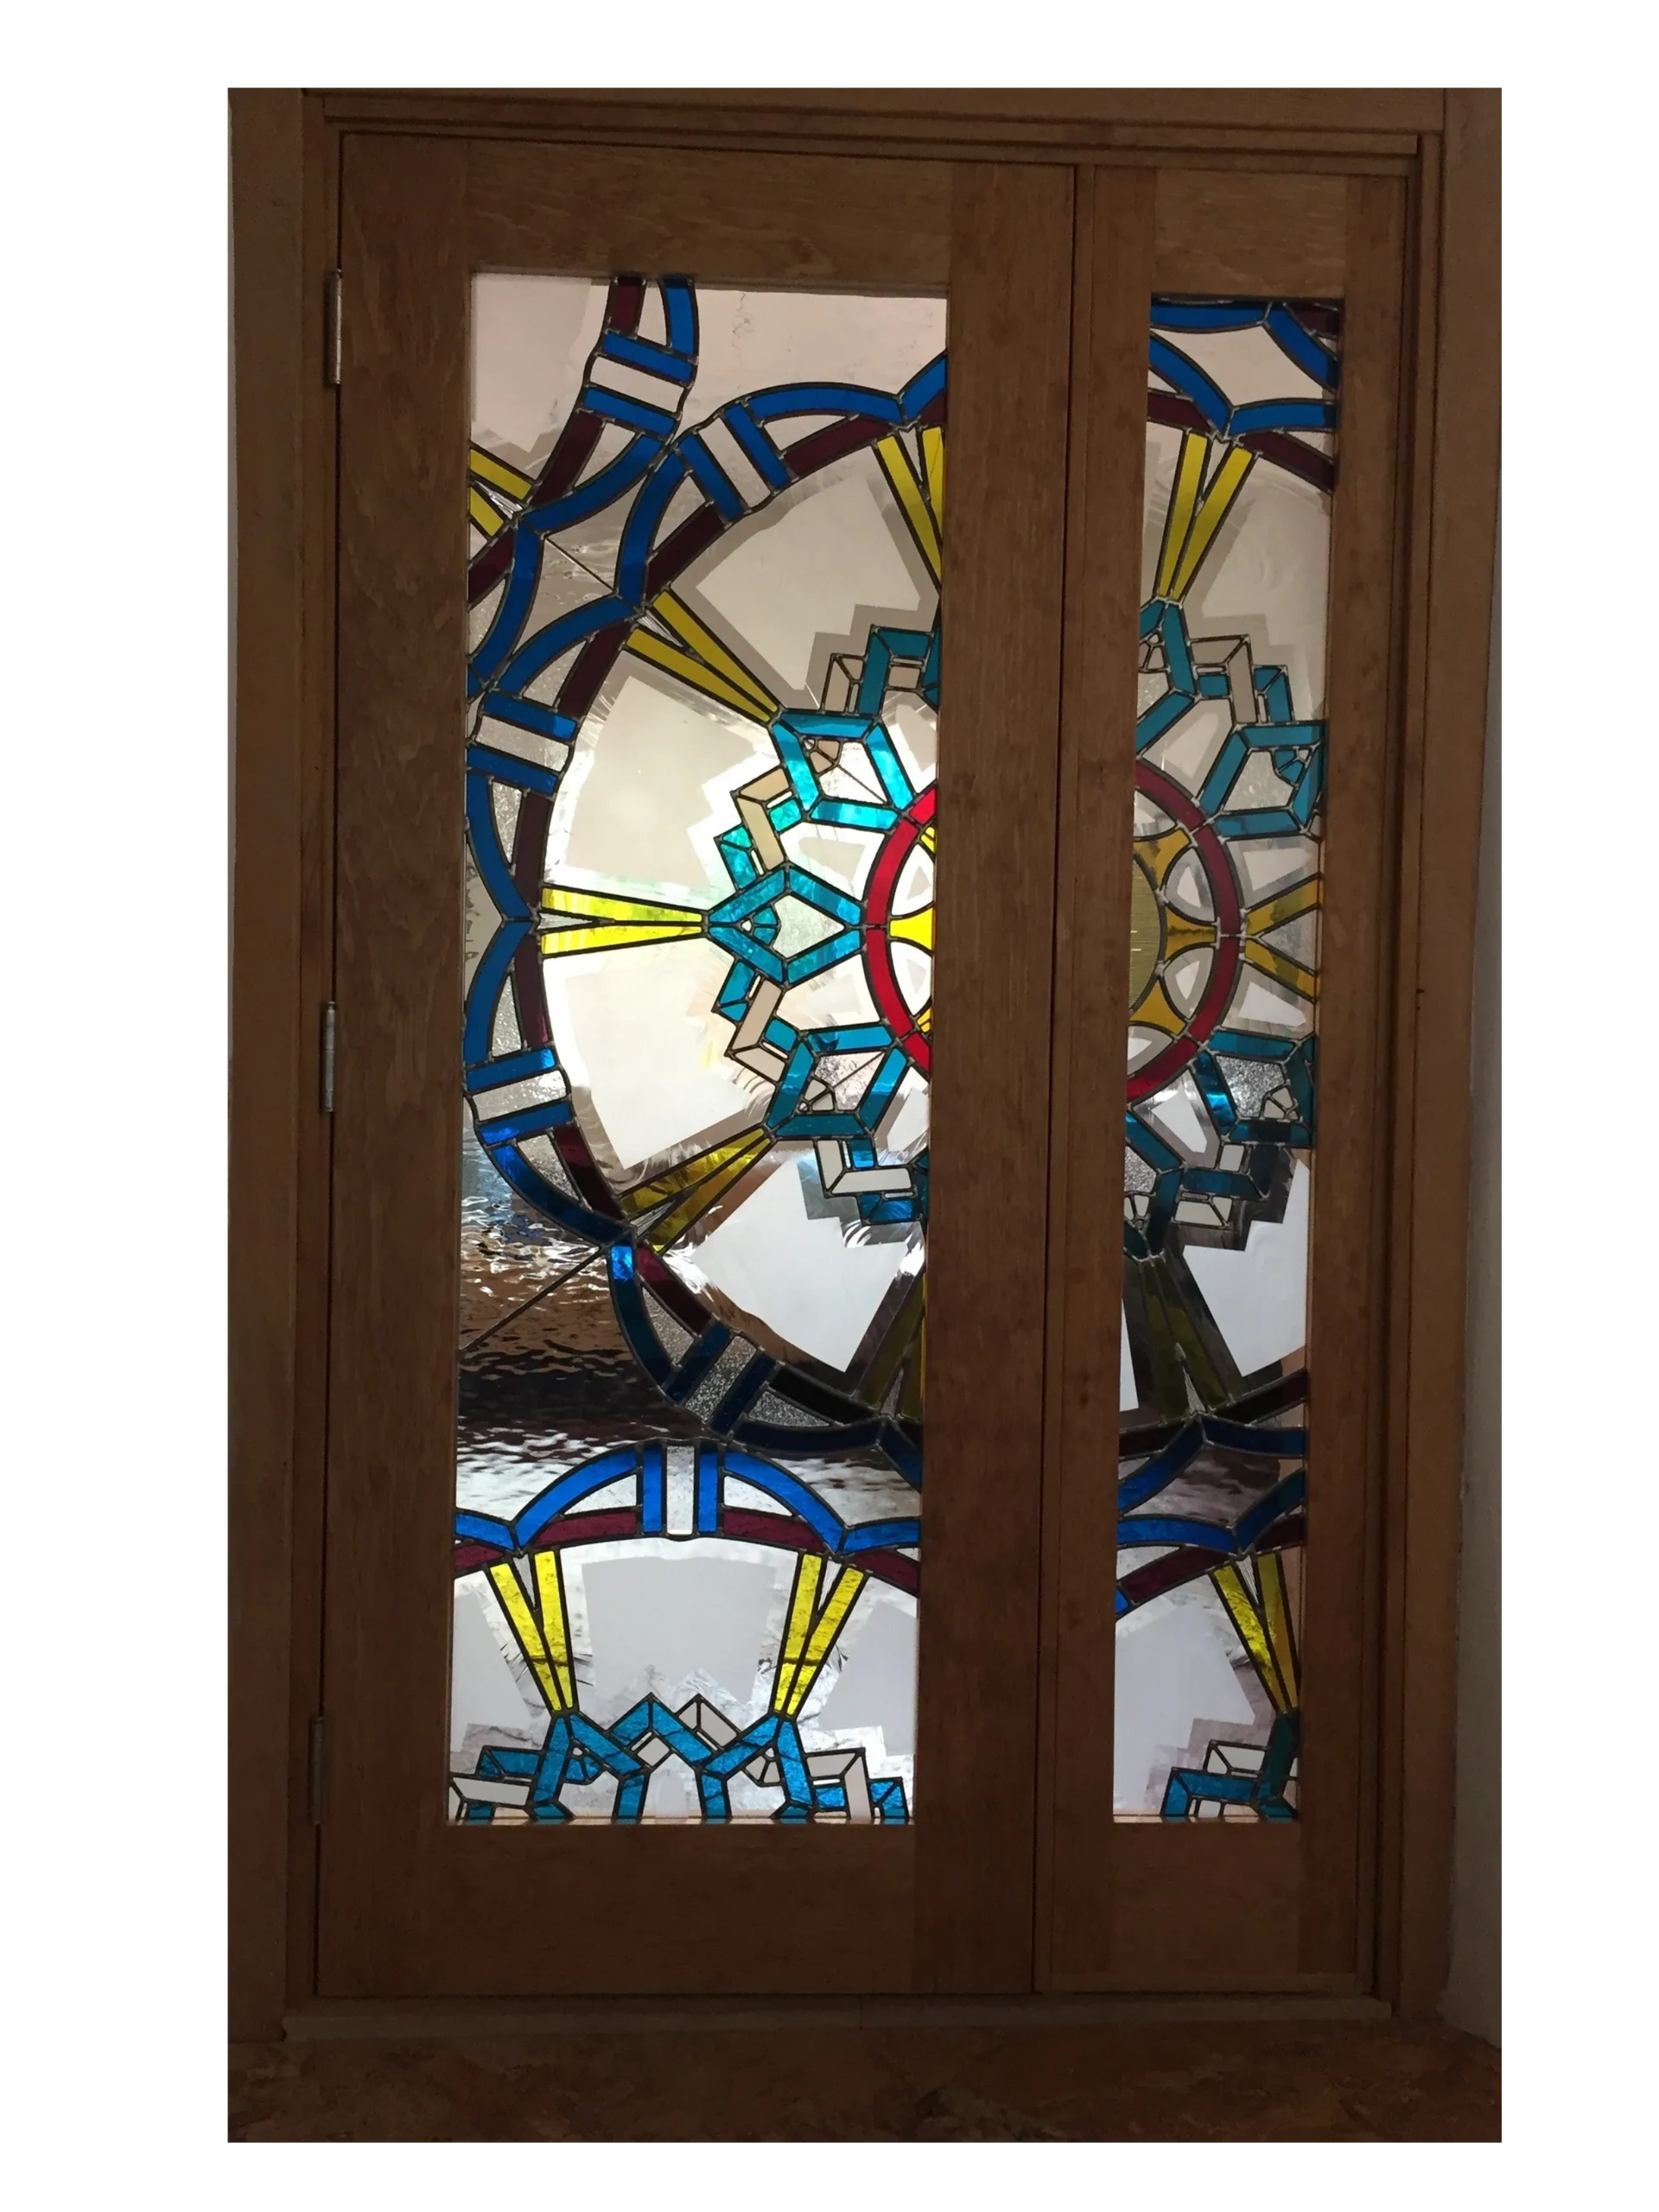 Abstract image of component of double helix in stained glass